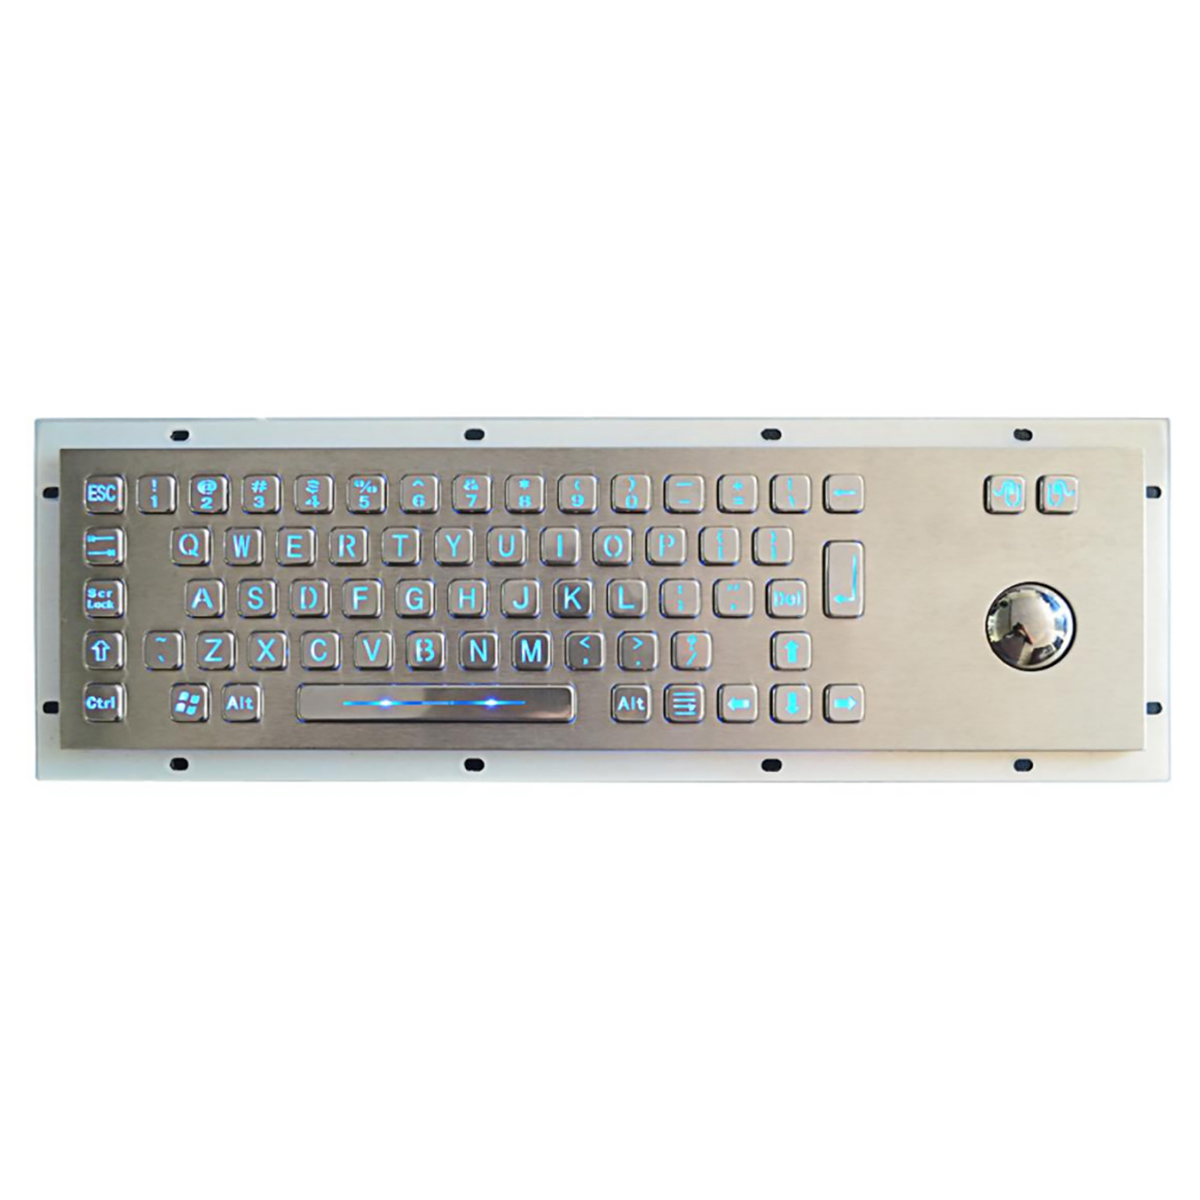 Rugged panel mount keyboard with trackball KB-000-NW0S0S1